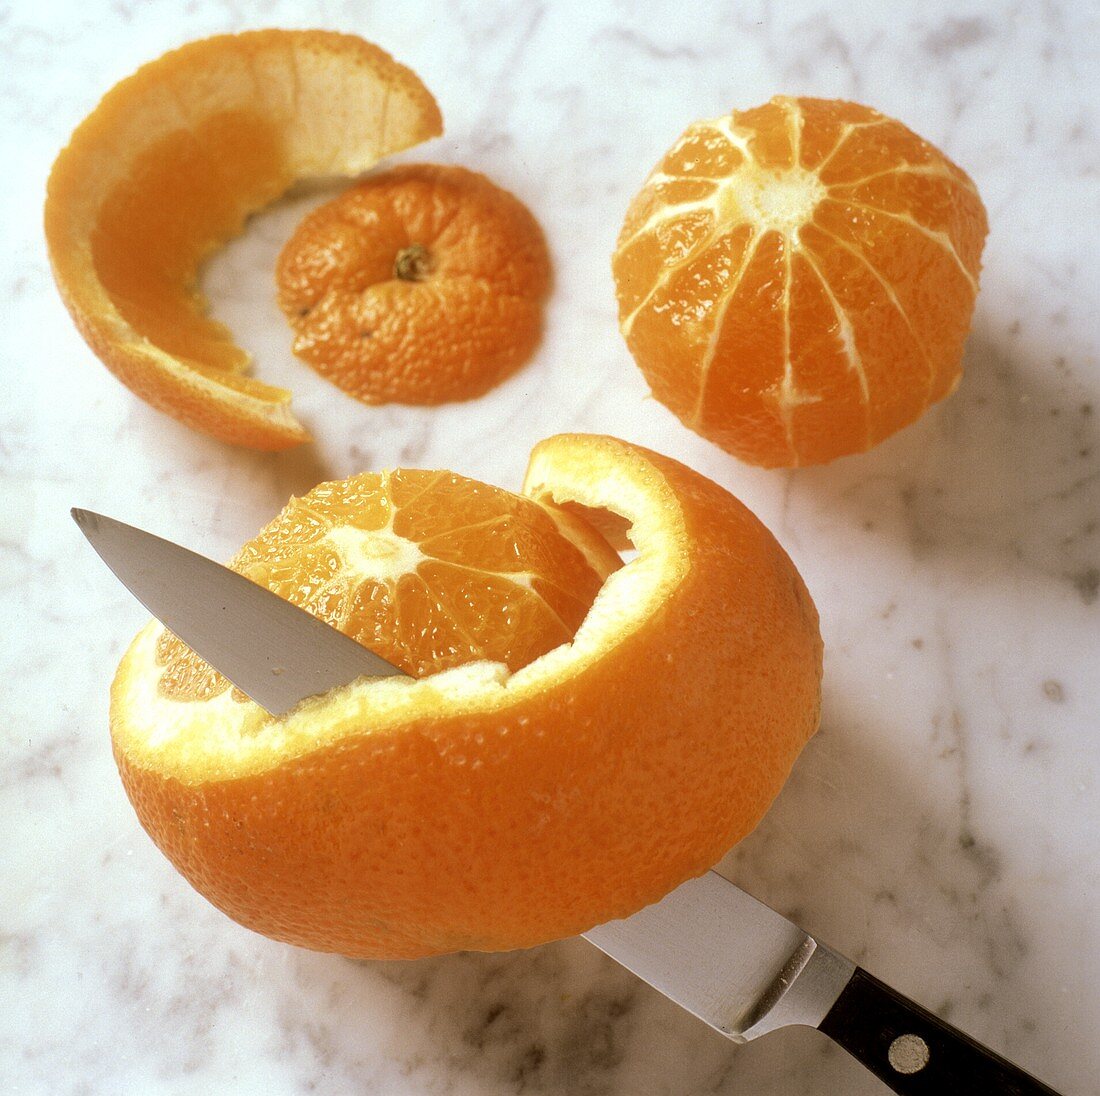 Thickly peeling an orange